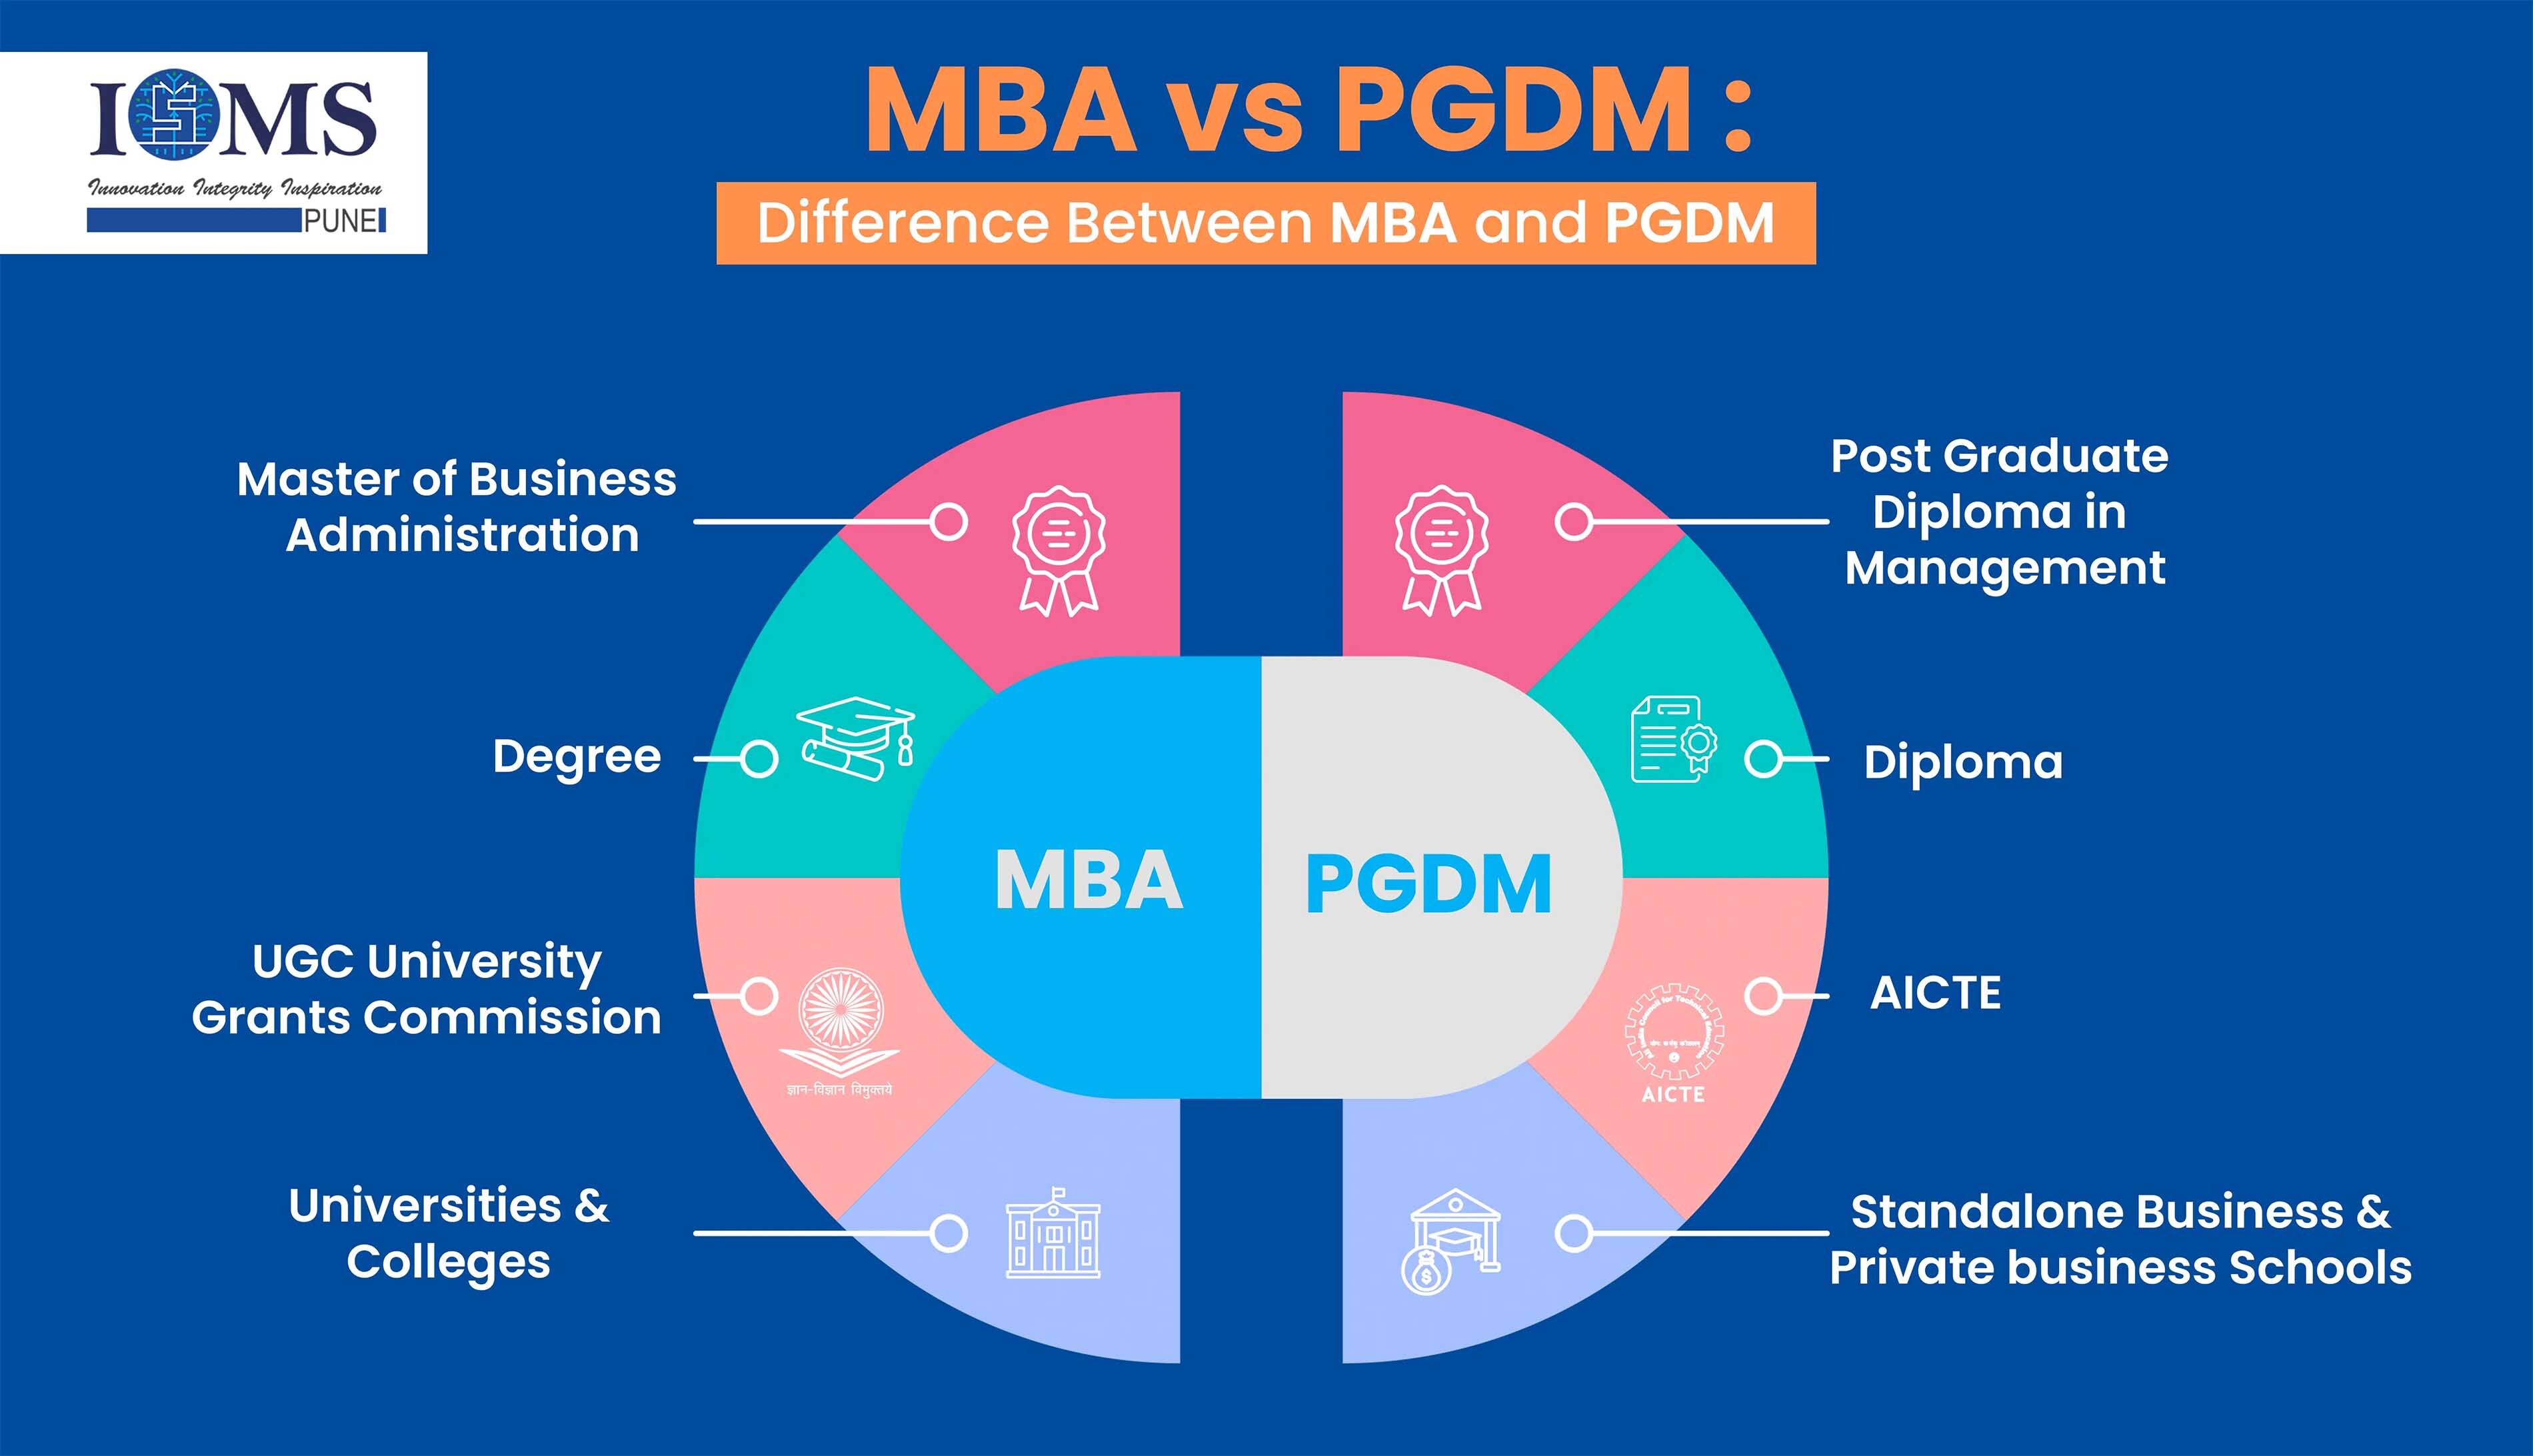 Difference Between MBA and PGDM